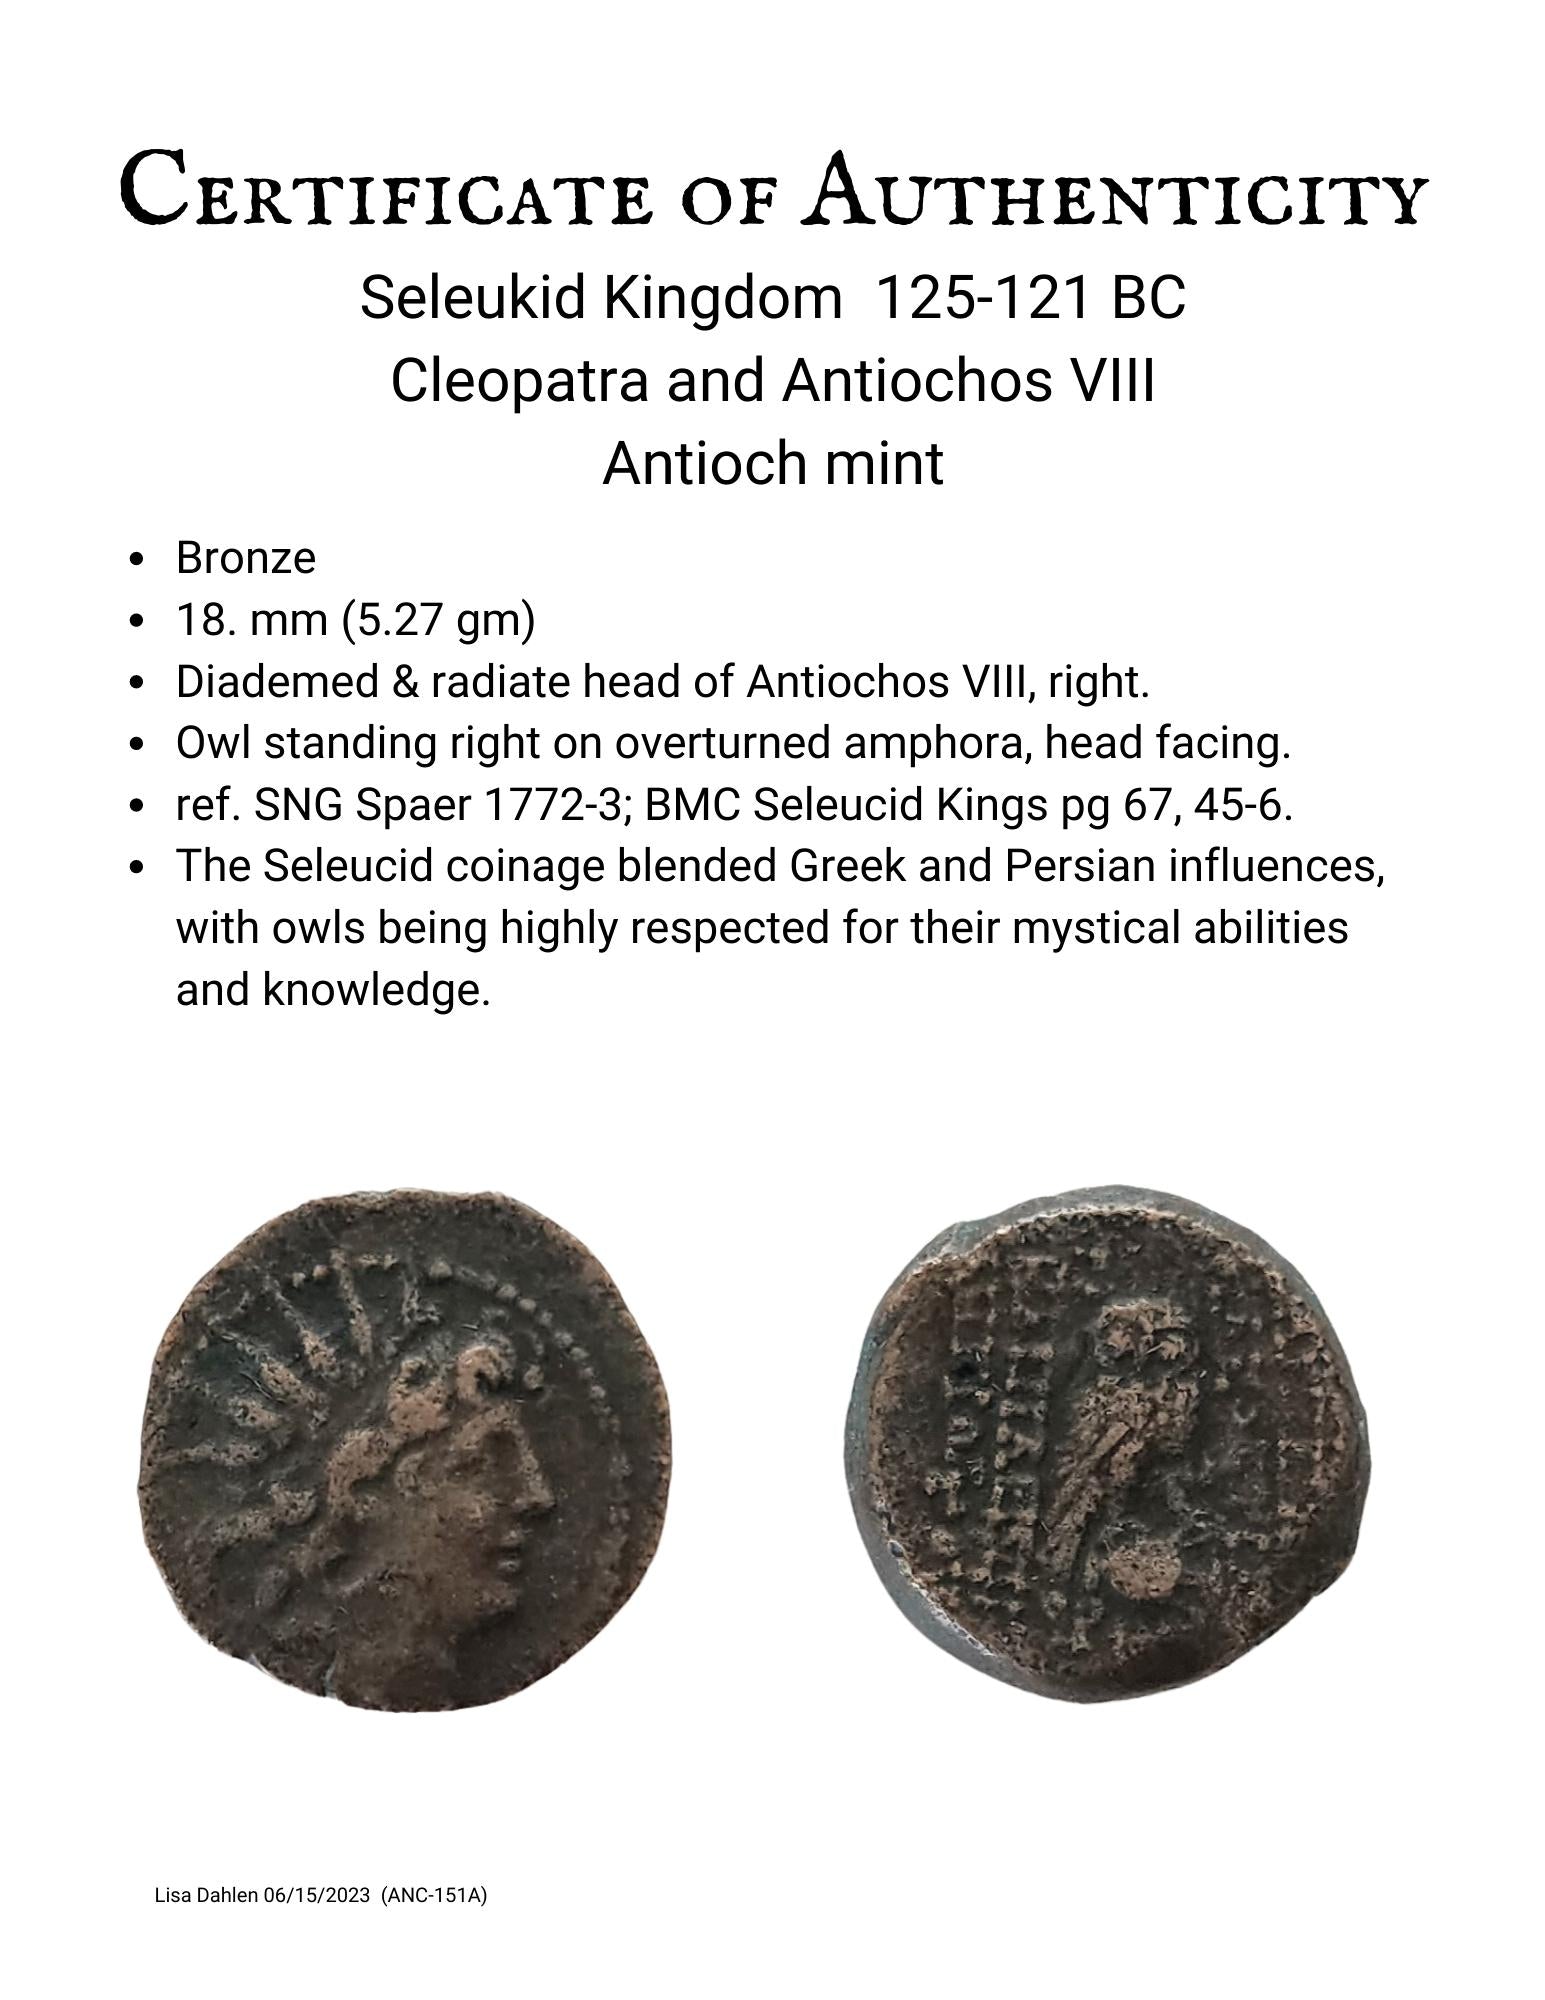 Certificate of authenticity of ancient Greek bronze coin from the Seleukid Kingdom of Antiochos VIII and an owl standing on an amphora.  125-121 BC